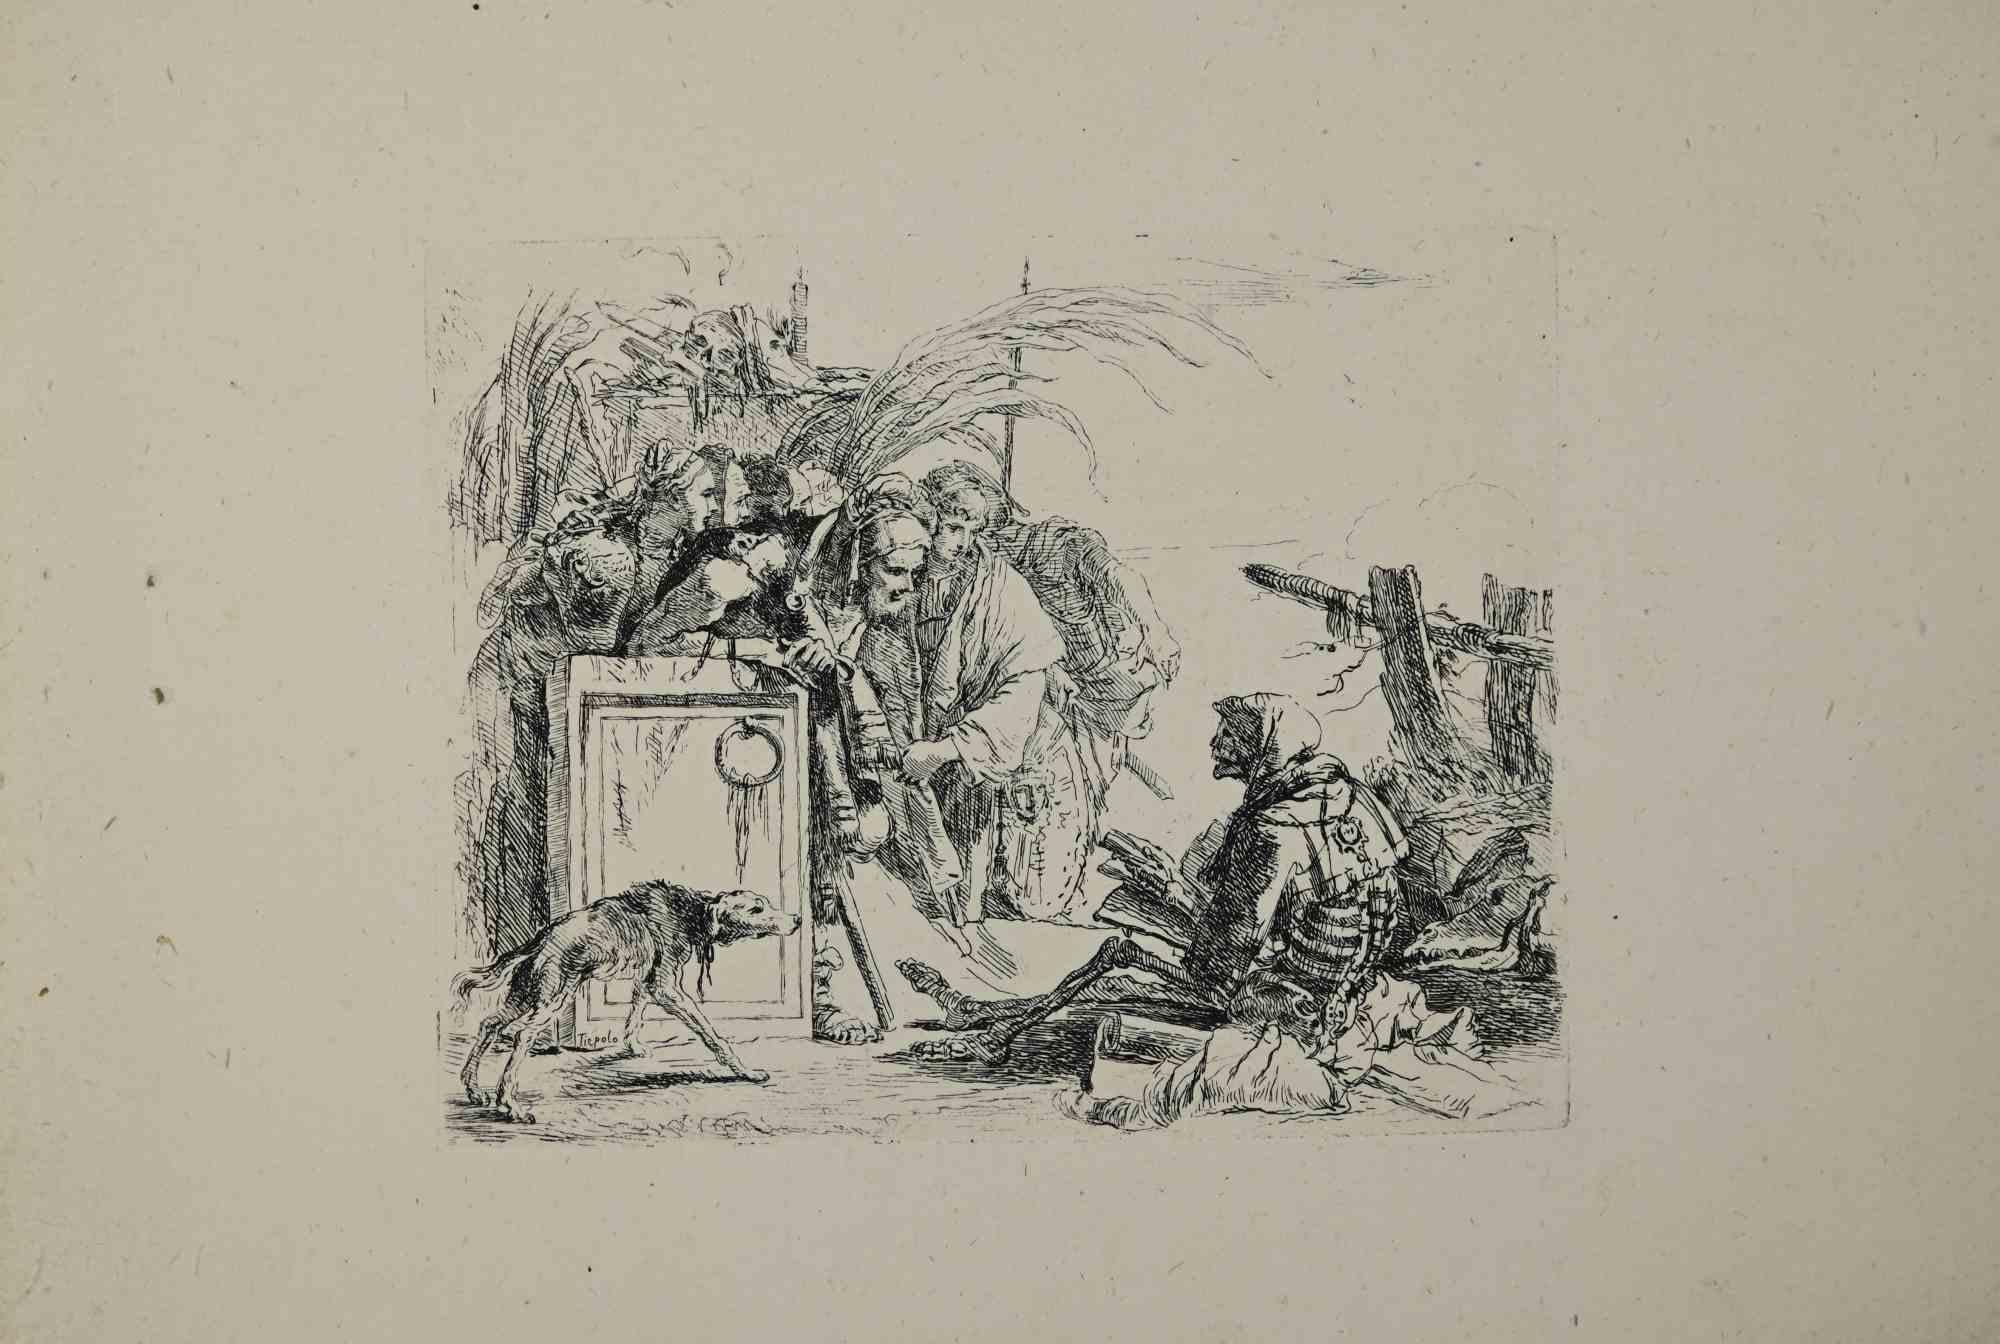 Giovanni Battista Tiepolo Figurative Print - Death Holds an Audience - Etching by G.B. Tiepolo - 1785